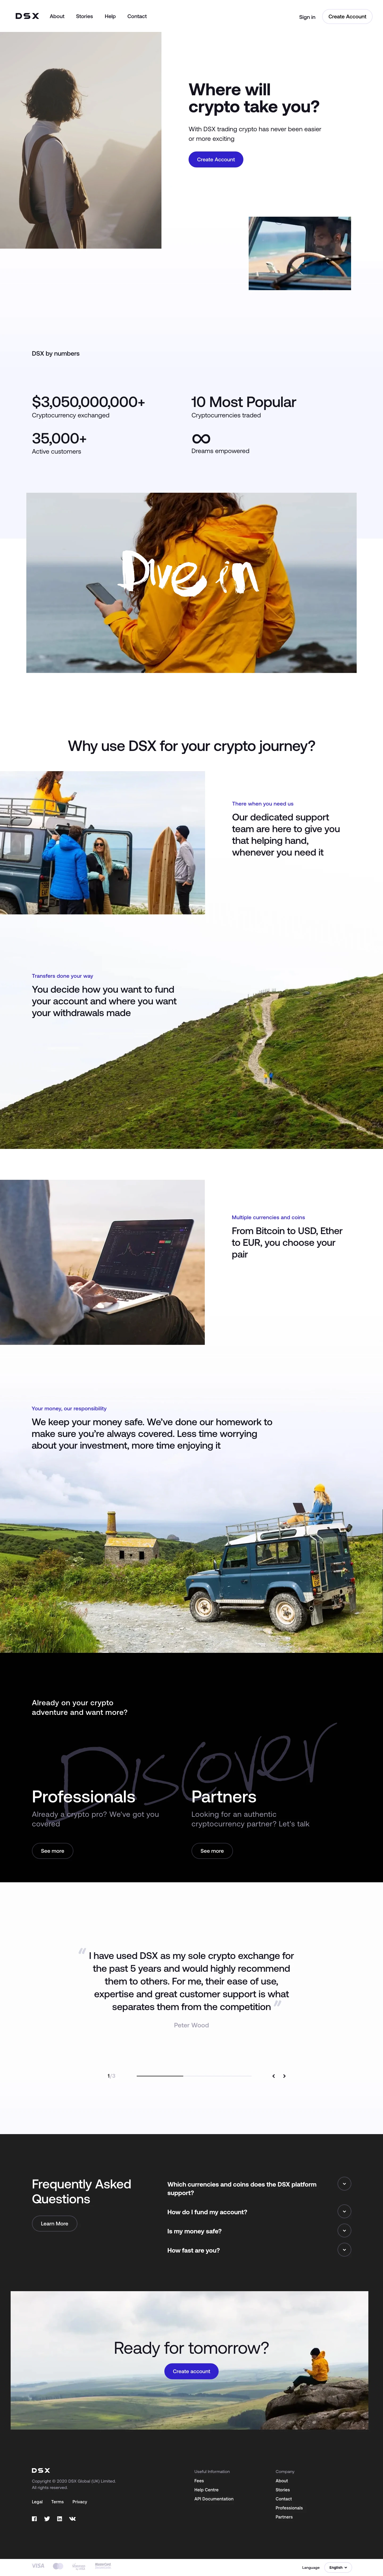 DSX Landing Page Example: Where will crypto take you? With DSX trading crypto has never been easier or more exciting.